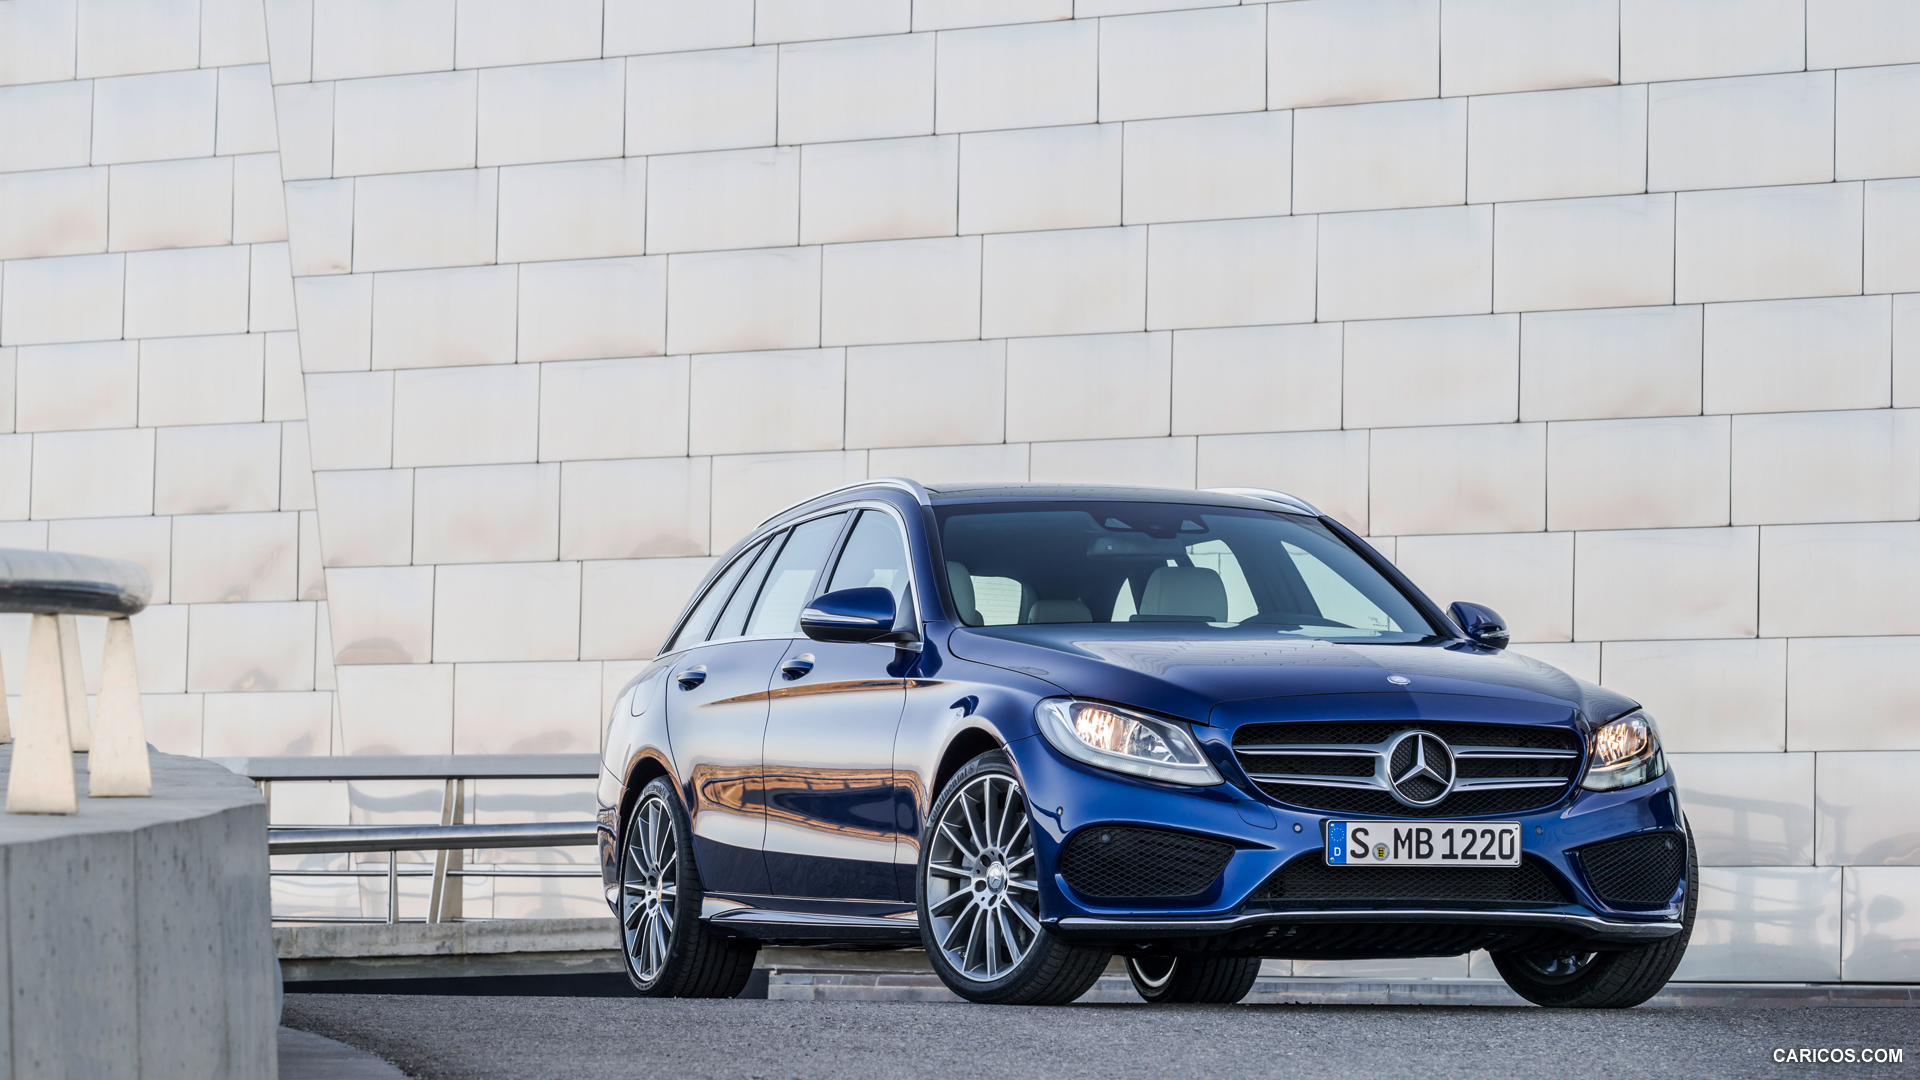 2015 Mercedes-Benz C-Class Estate C250 BlueTEC 4MATIC (AMG sports package) - Front, #61 of 173